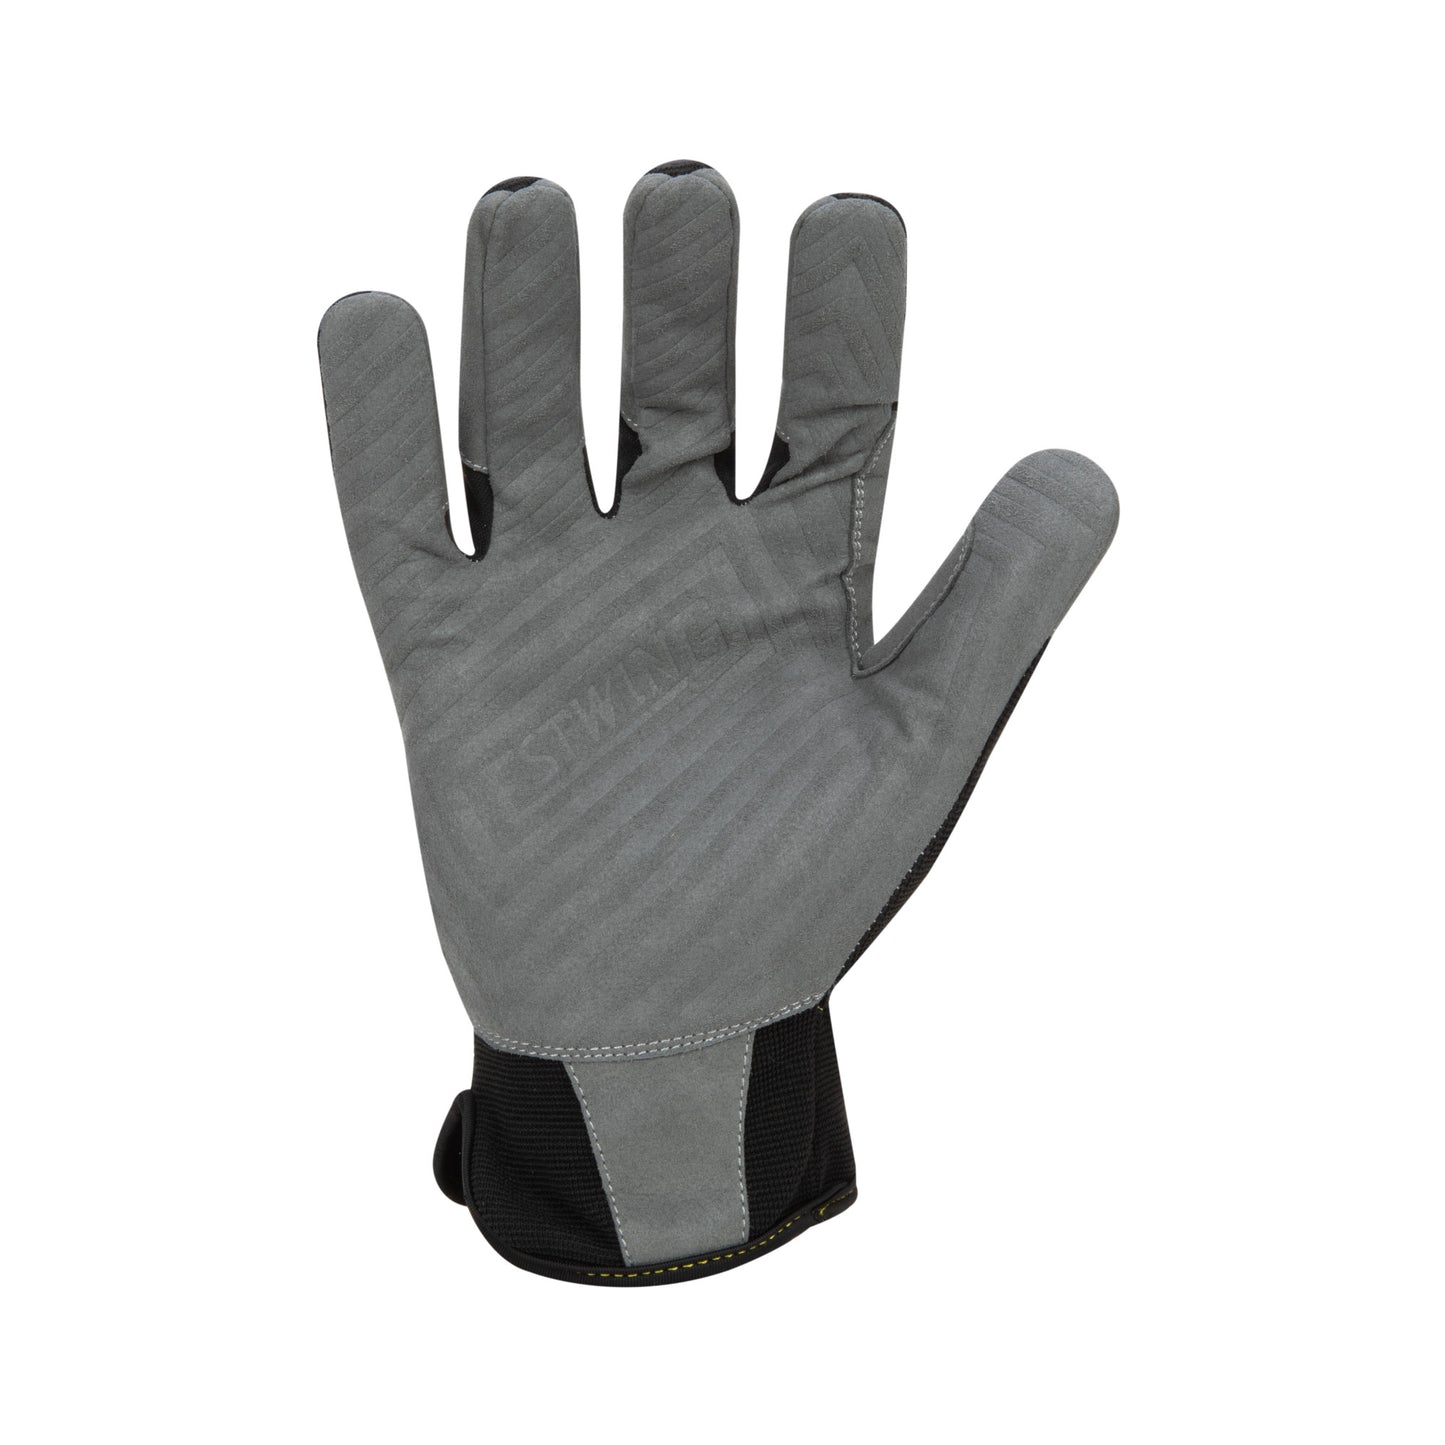 Impact Speedcuff Gloves in Black and Gray